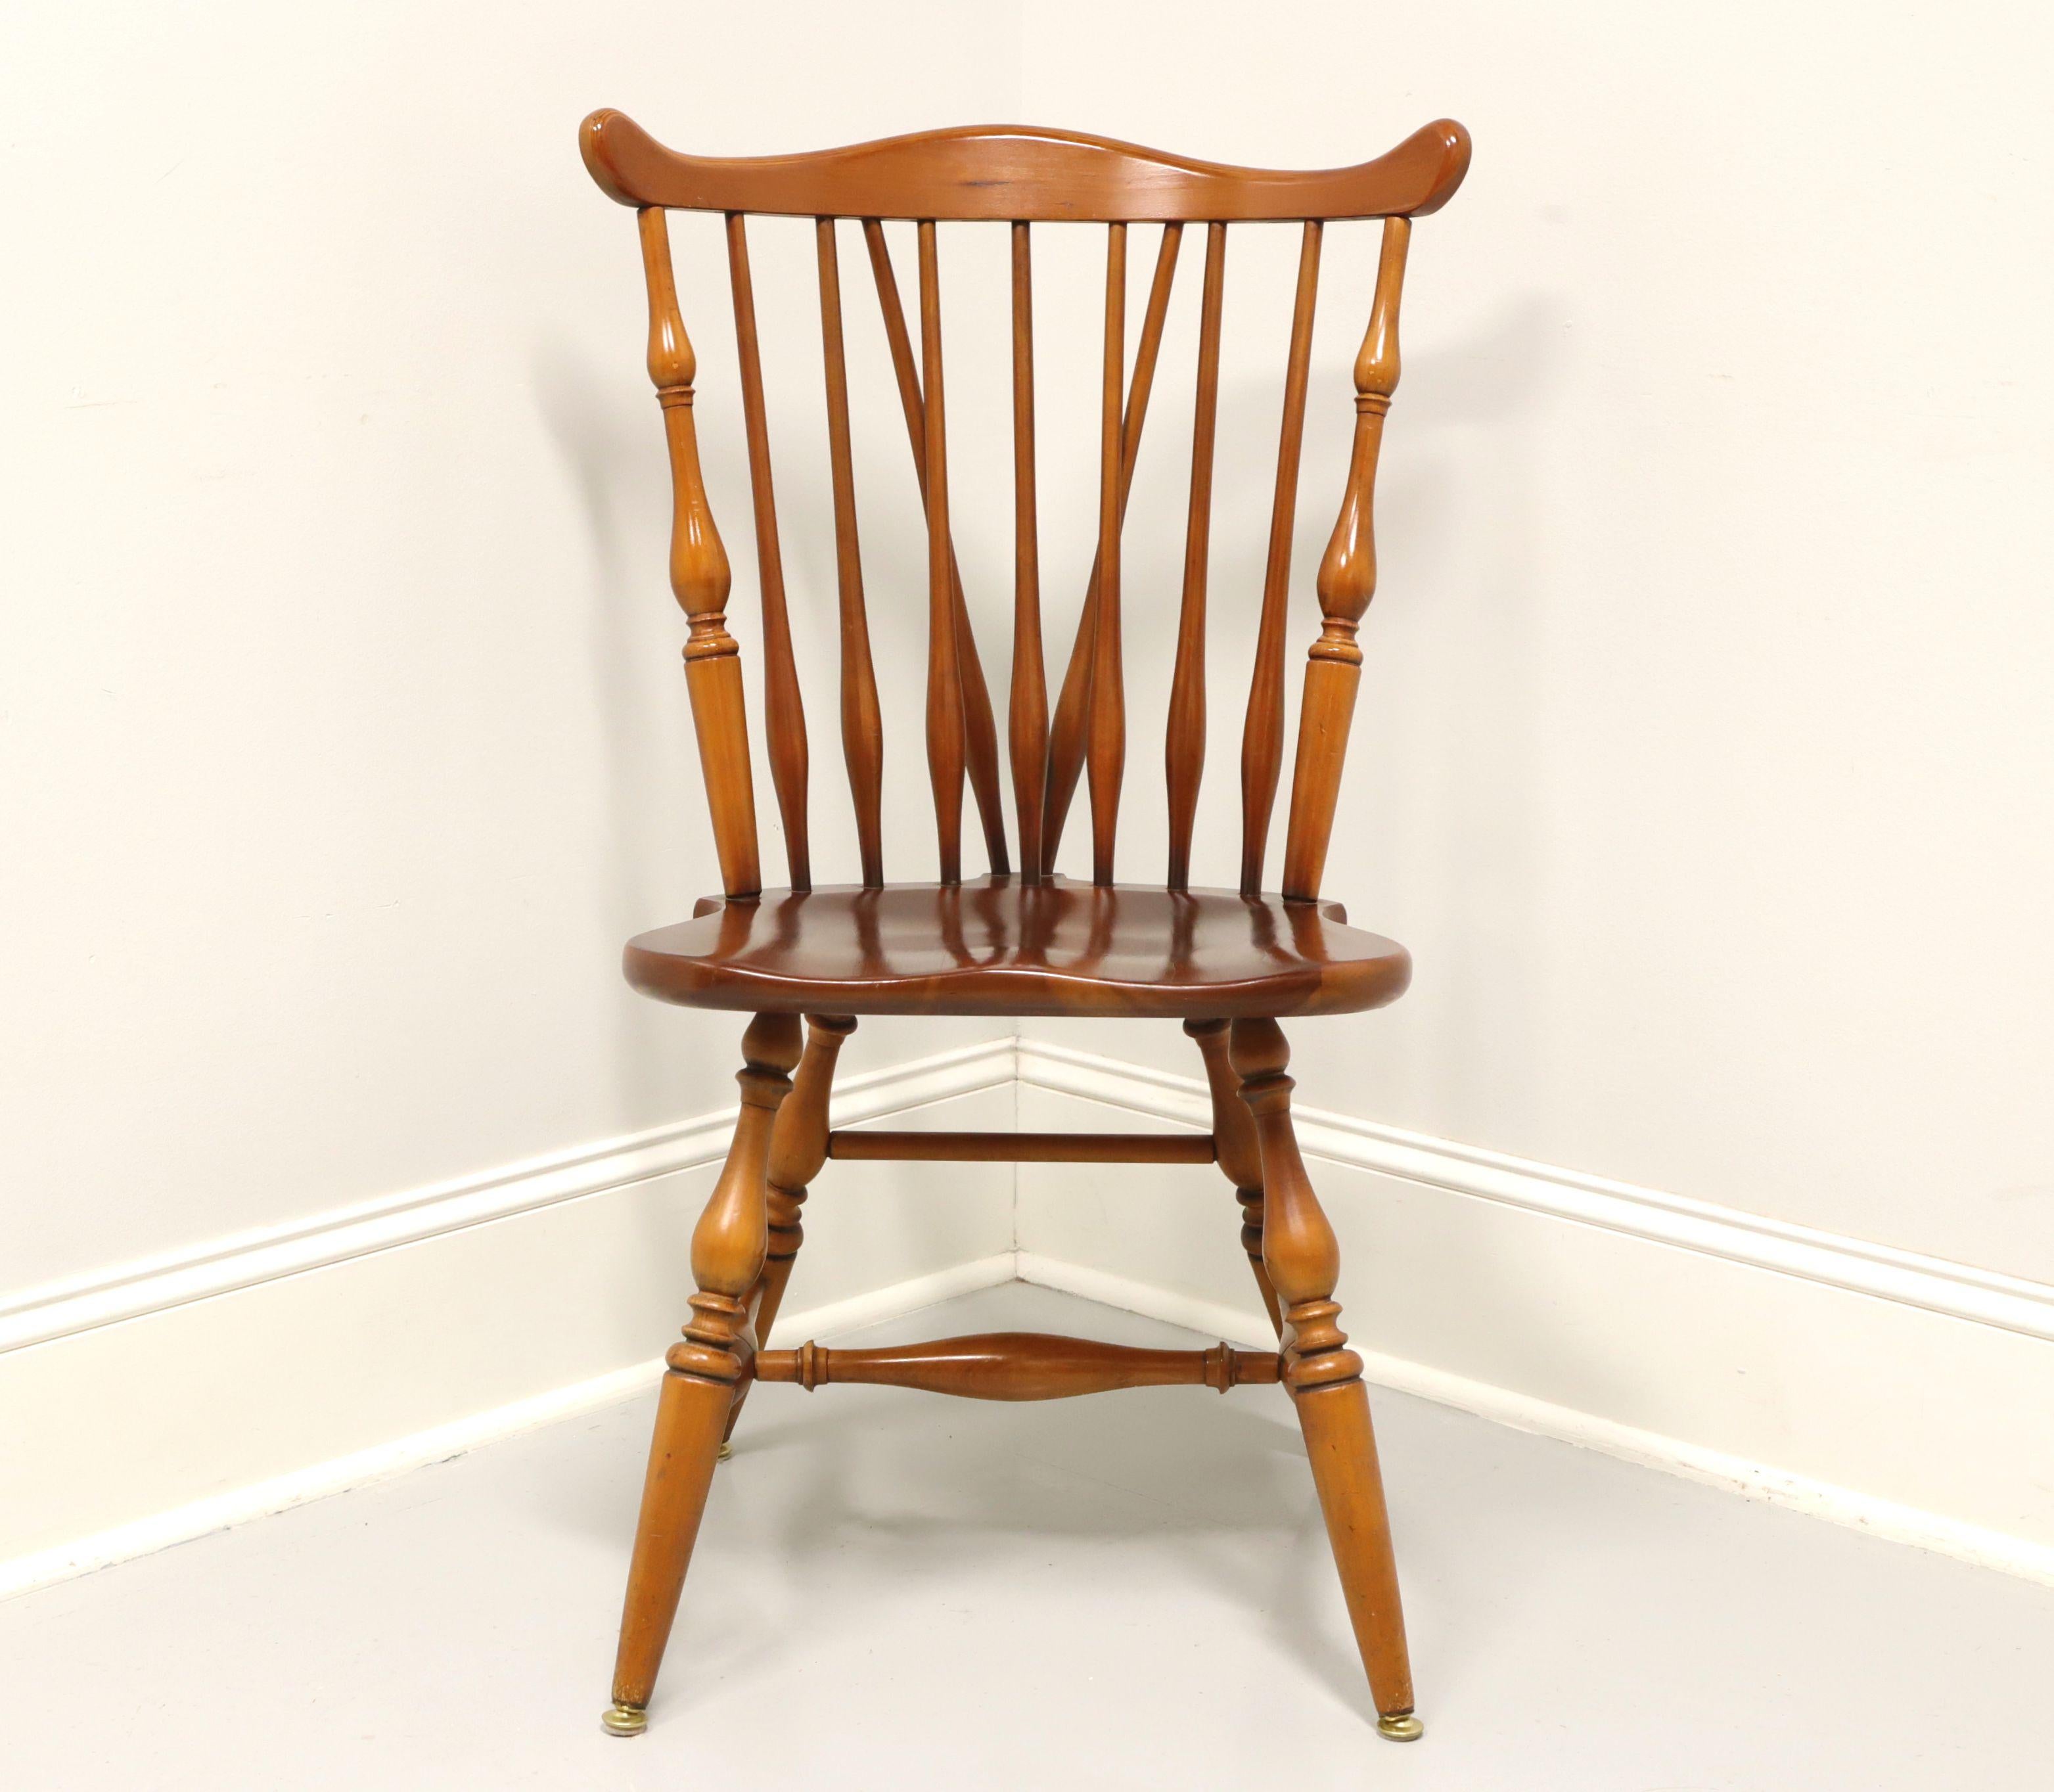 A Windsor style dining side chair by Ethan Allen, their Duxbury. Solid maple, fiddleback with turned side spindles, saddle shape seat, tail-supports with spindles, turned legs and stretchers. Made in the USA, in the mid 20th Century.

Style #: